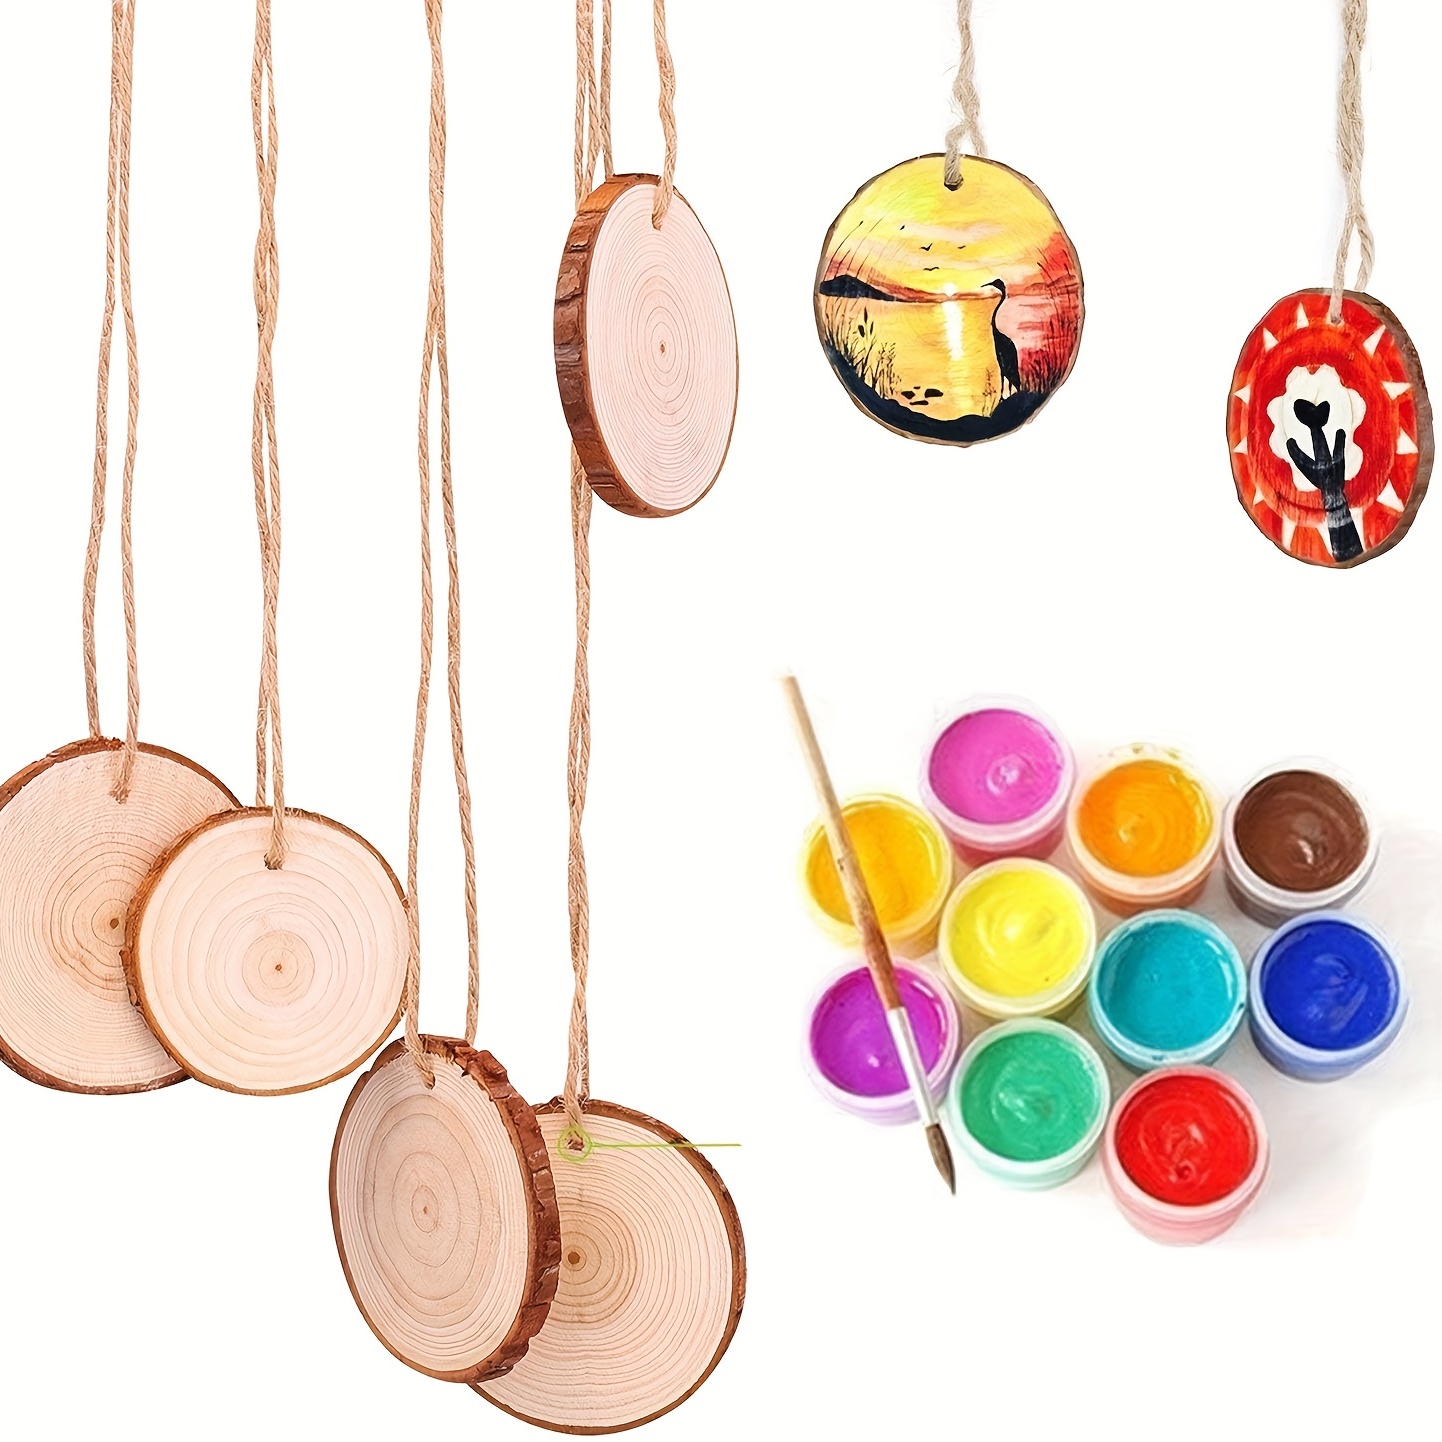 20-50Pcs Round Shape Natural Wooden Ornament Handmade Wood Slices with Hole Discs  Crafts for Wedding Party Christmas Home Decor